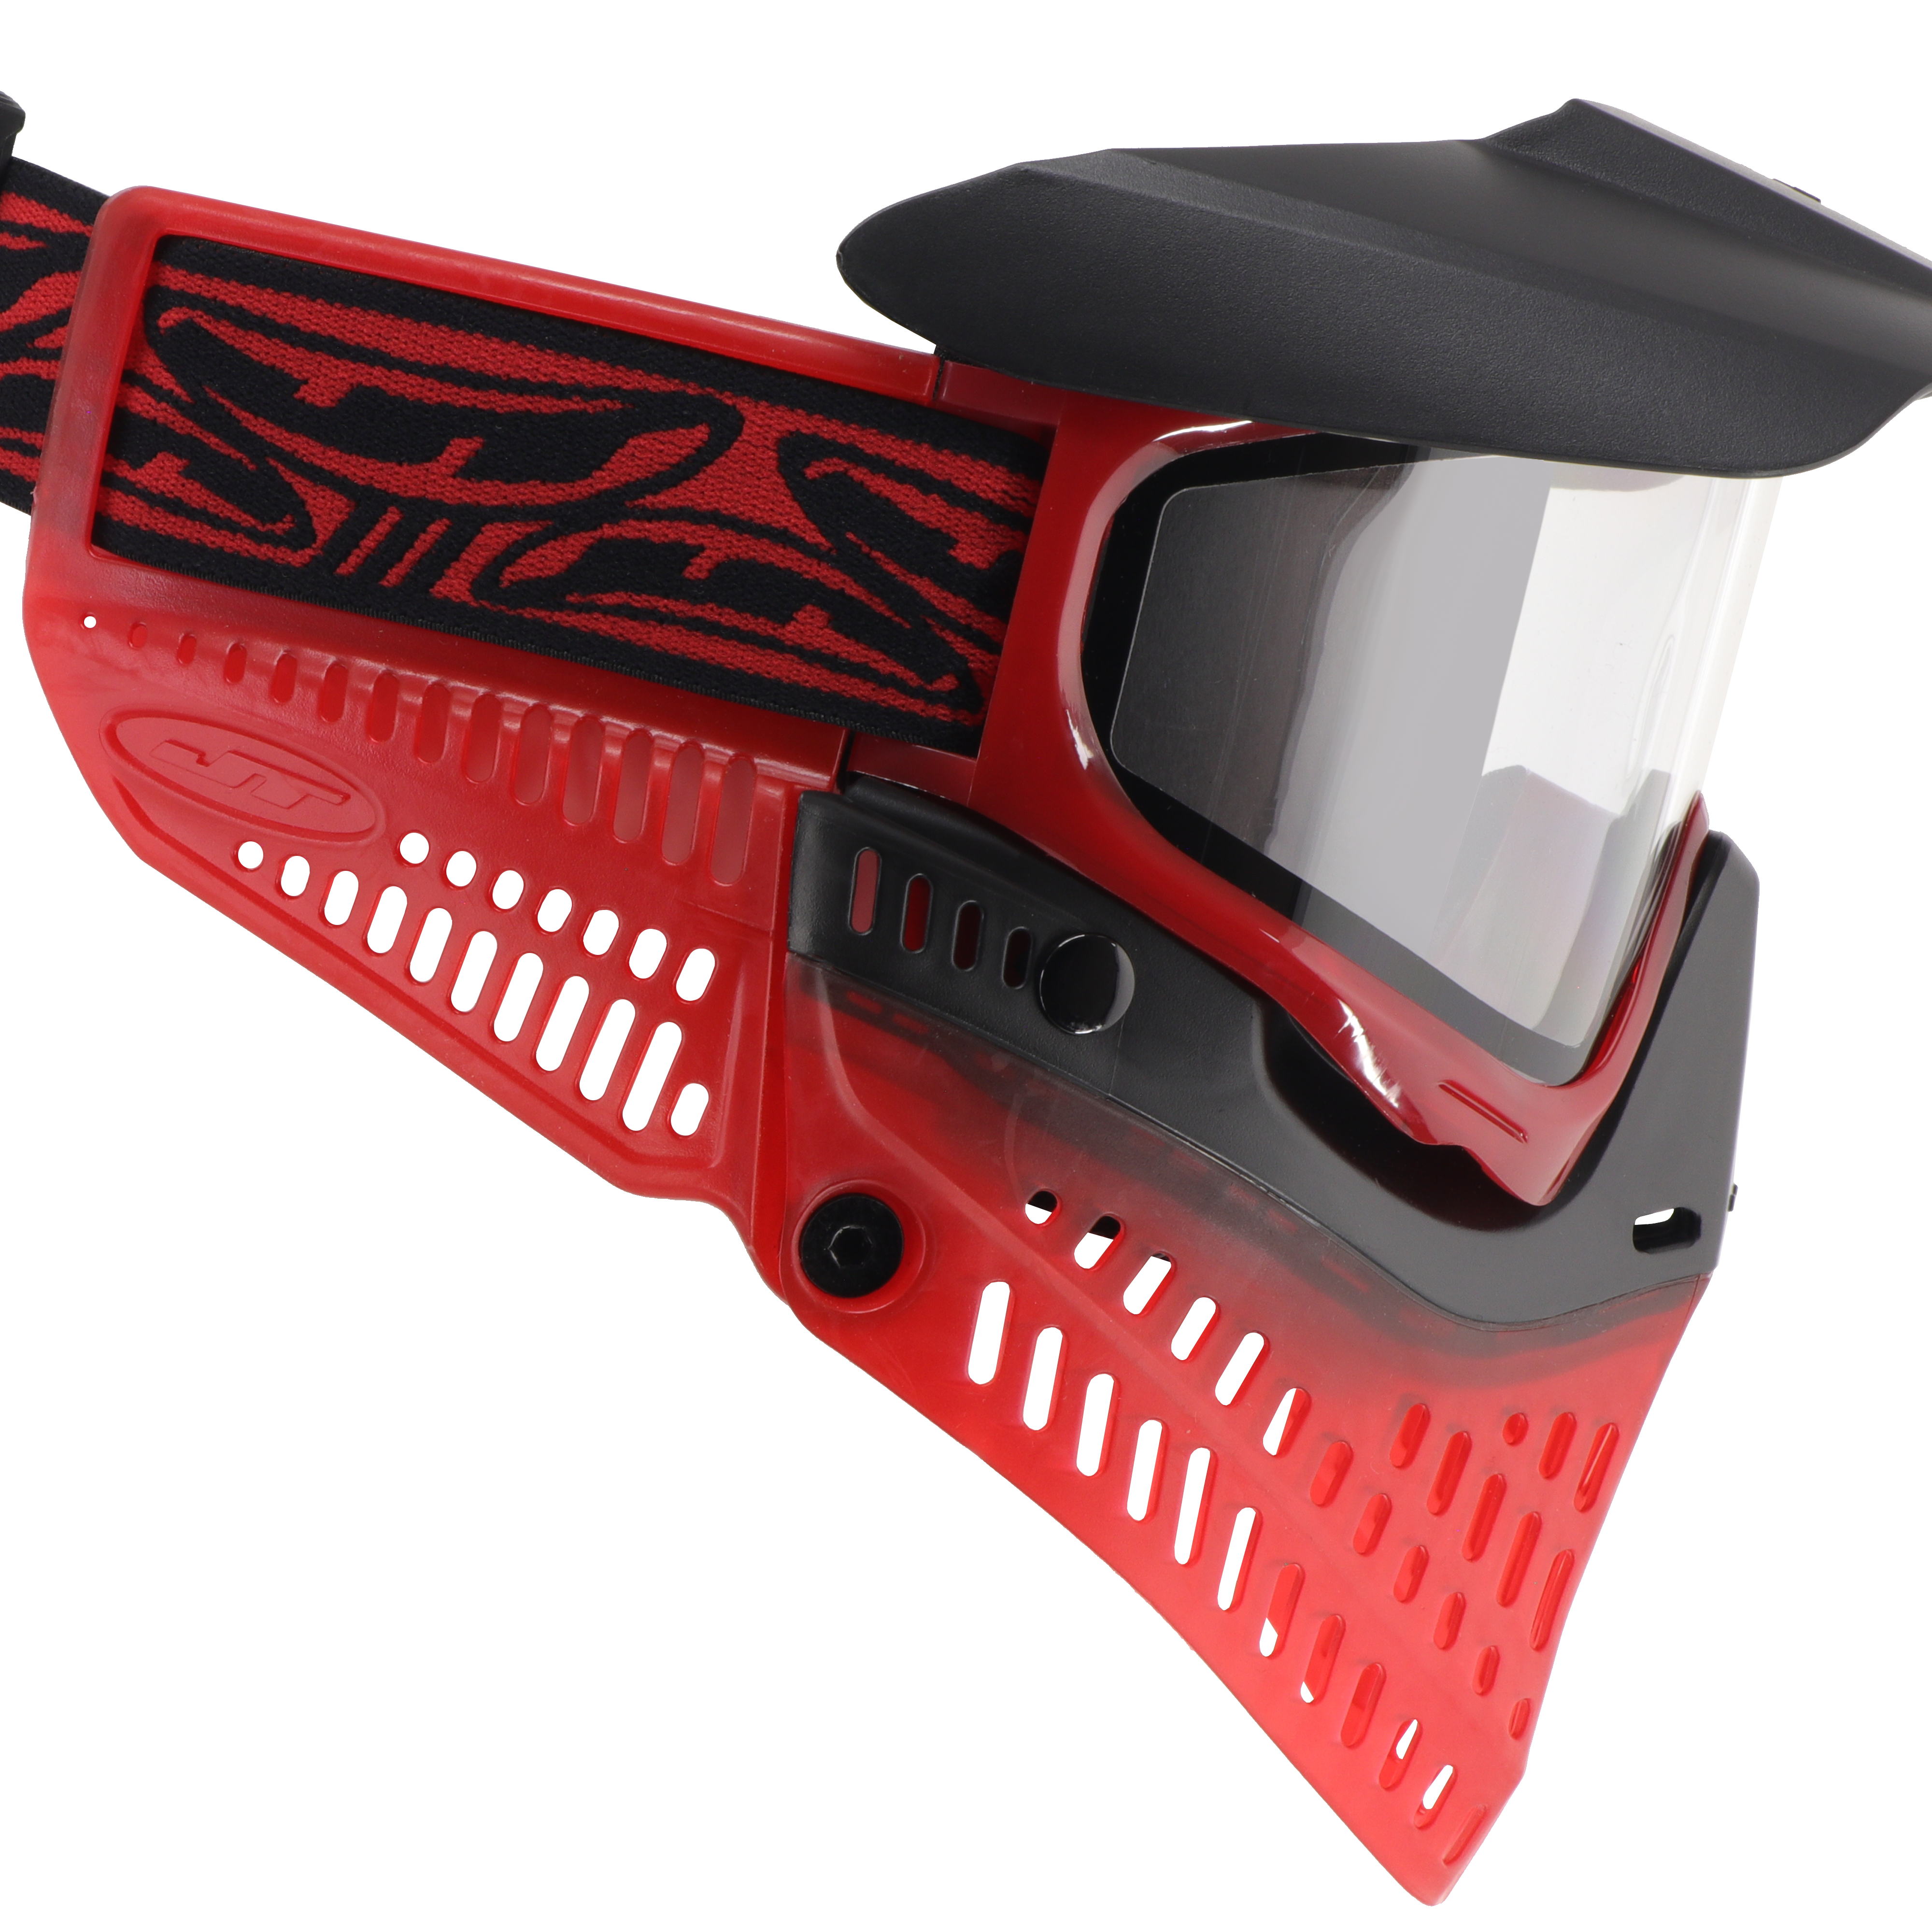 JT Proflex Paintball Mask - LE Translucent Ice Red